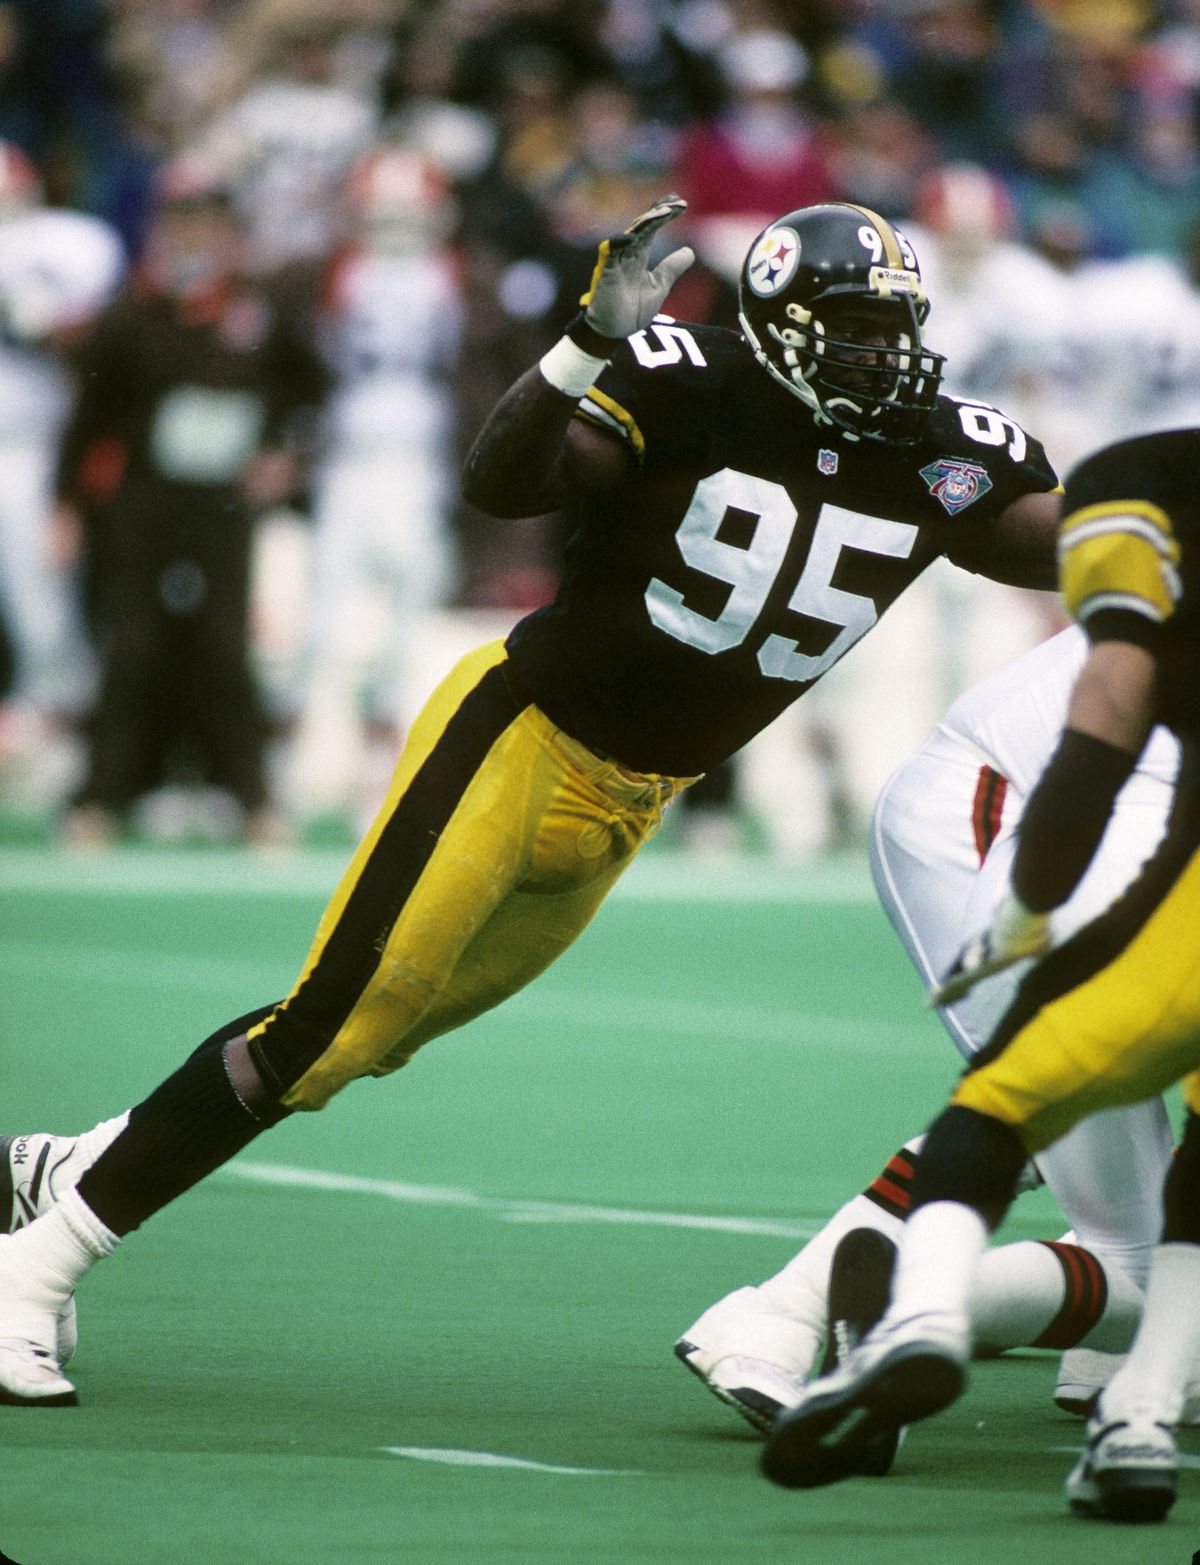 1994 AFC Divisional Playoff Game - Cleveland Browns vs Pittsburgh Steelers - January 7, 1995